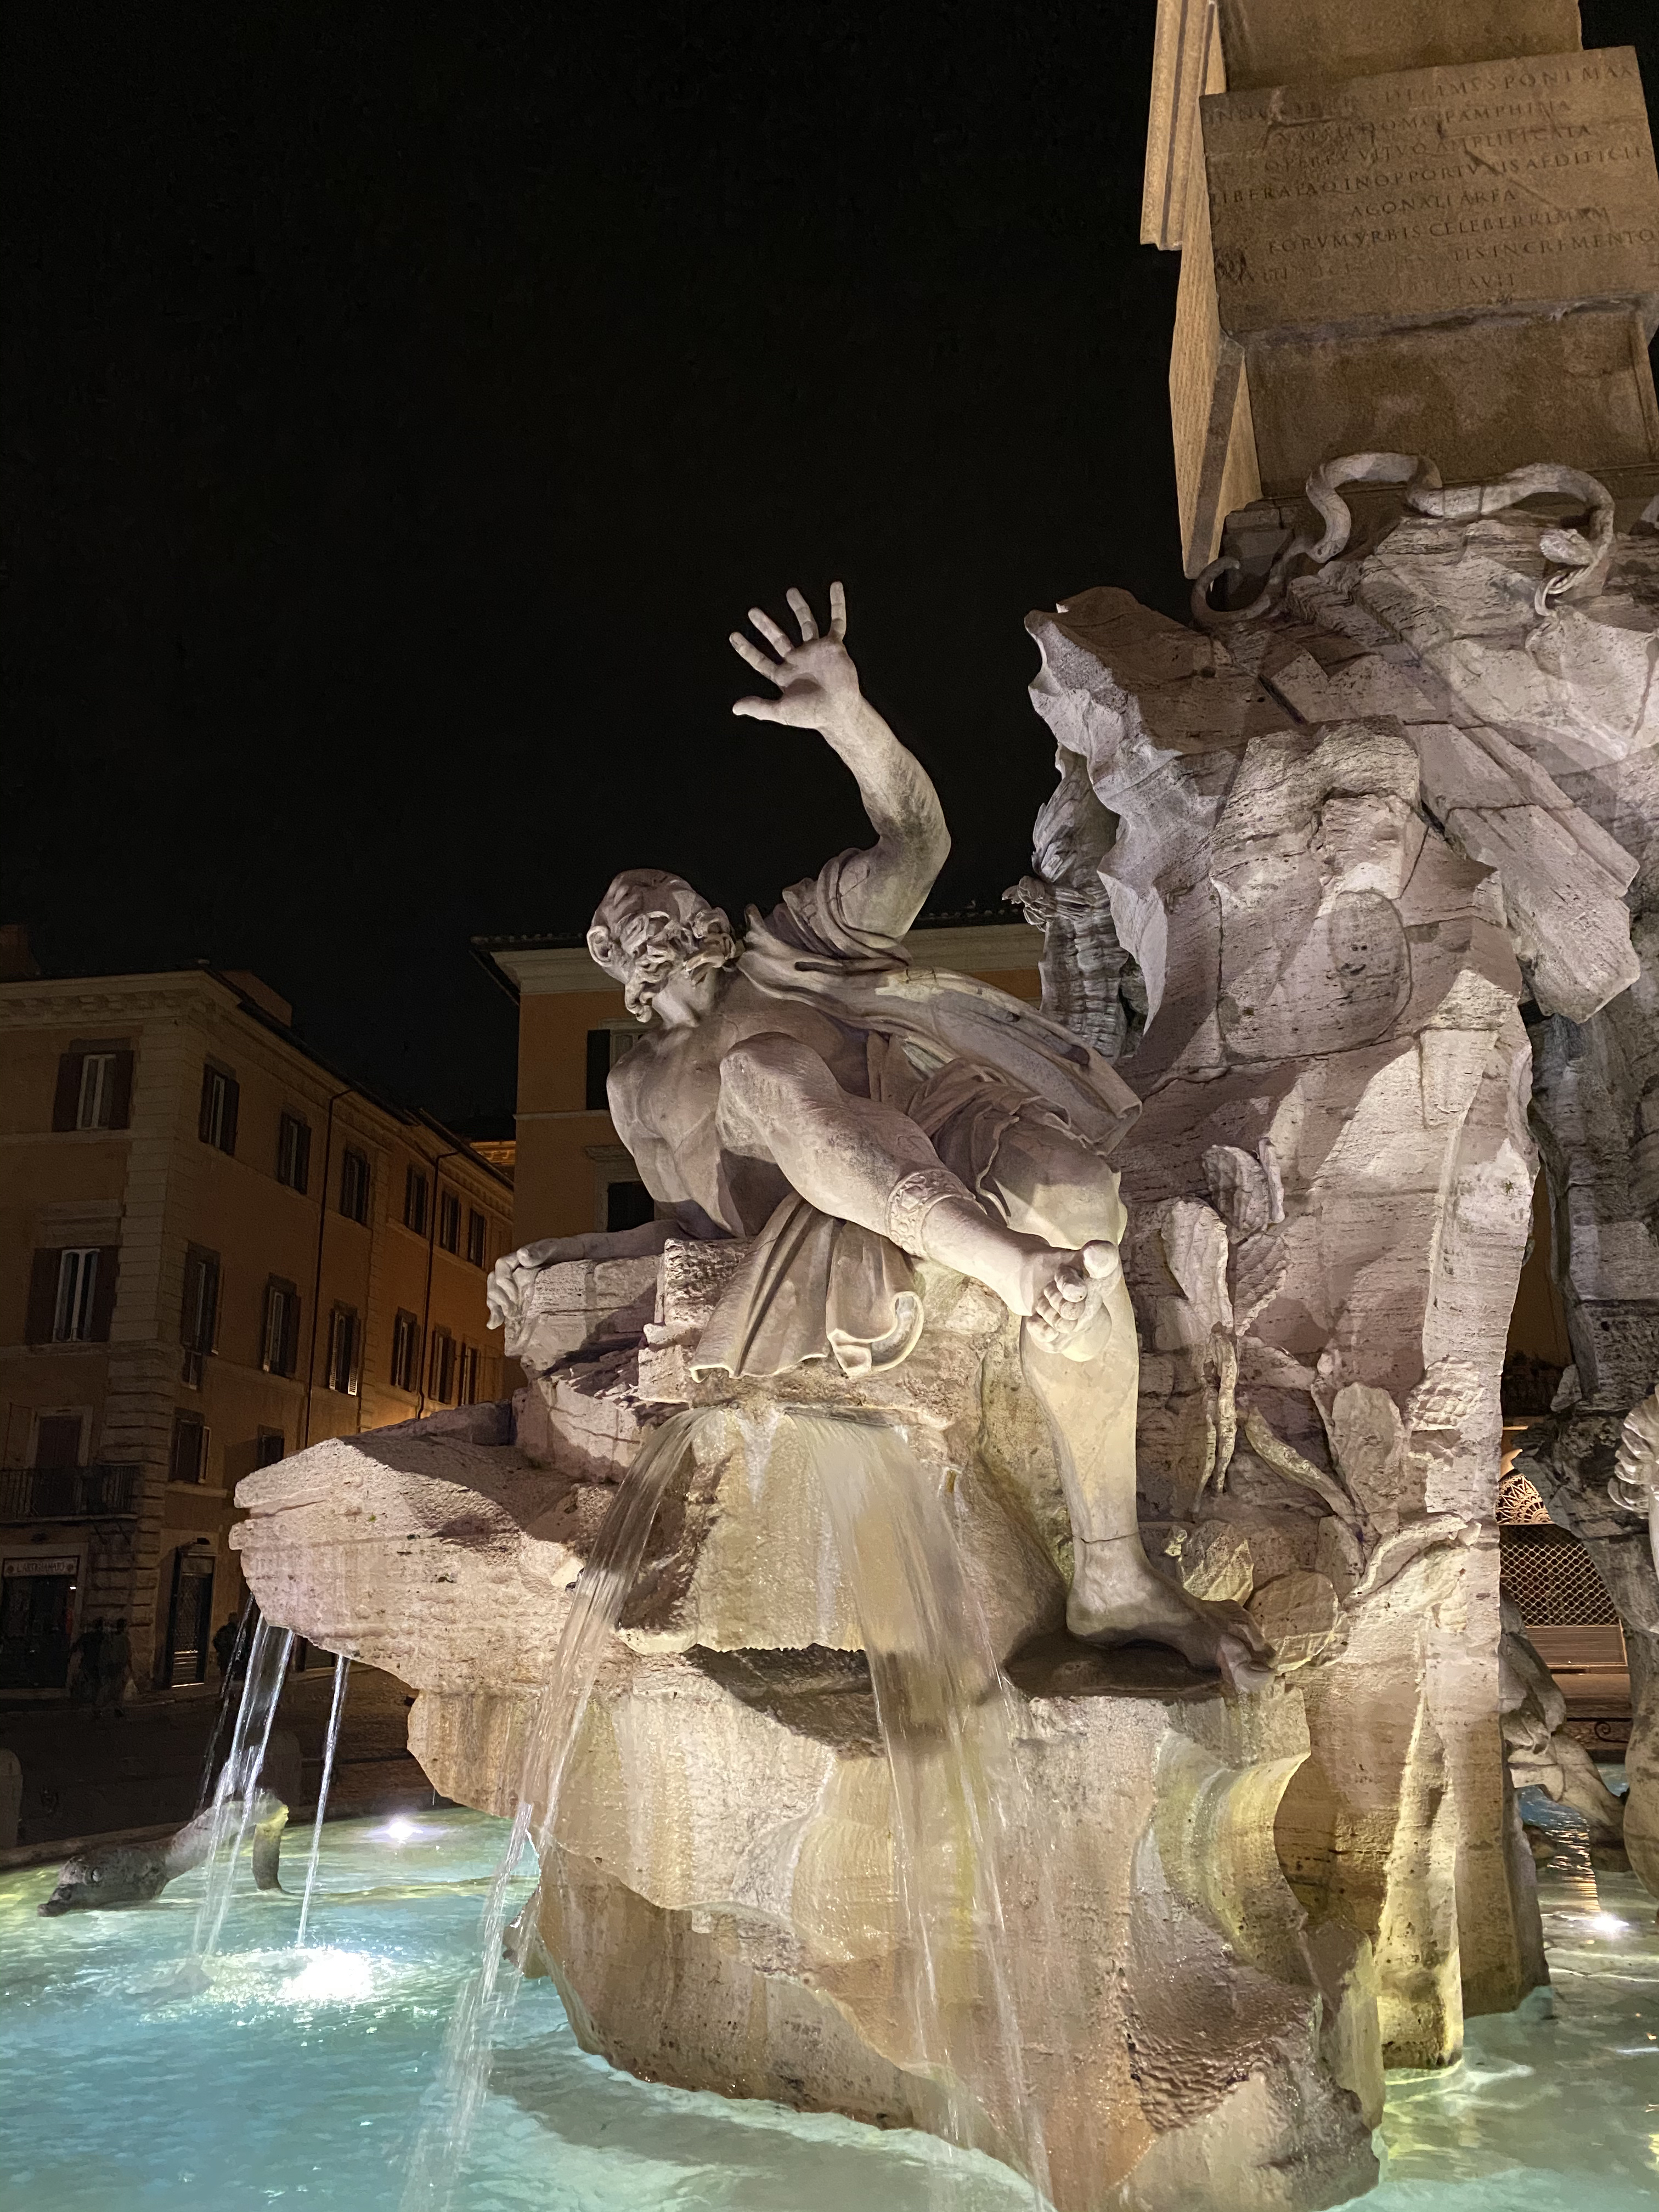 Detail of the Fountain of the Four Rivers, wide camera, night mode on. (Pictured: river god Río de la Plata, scared by a snake. This fountain is full of metaphors and allegories.)